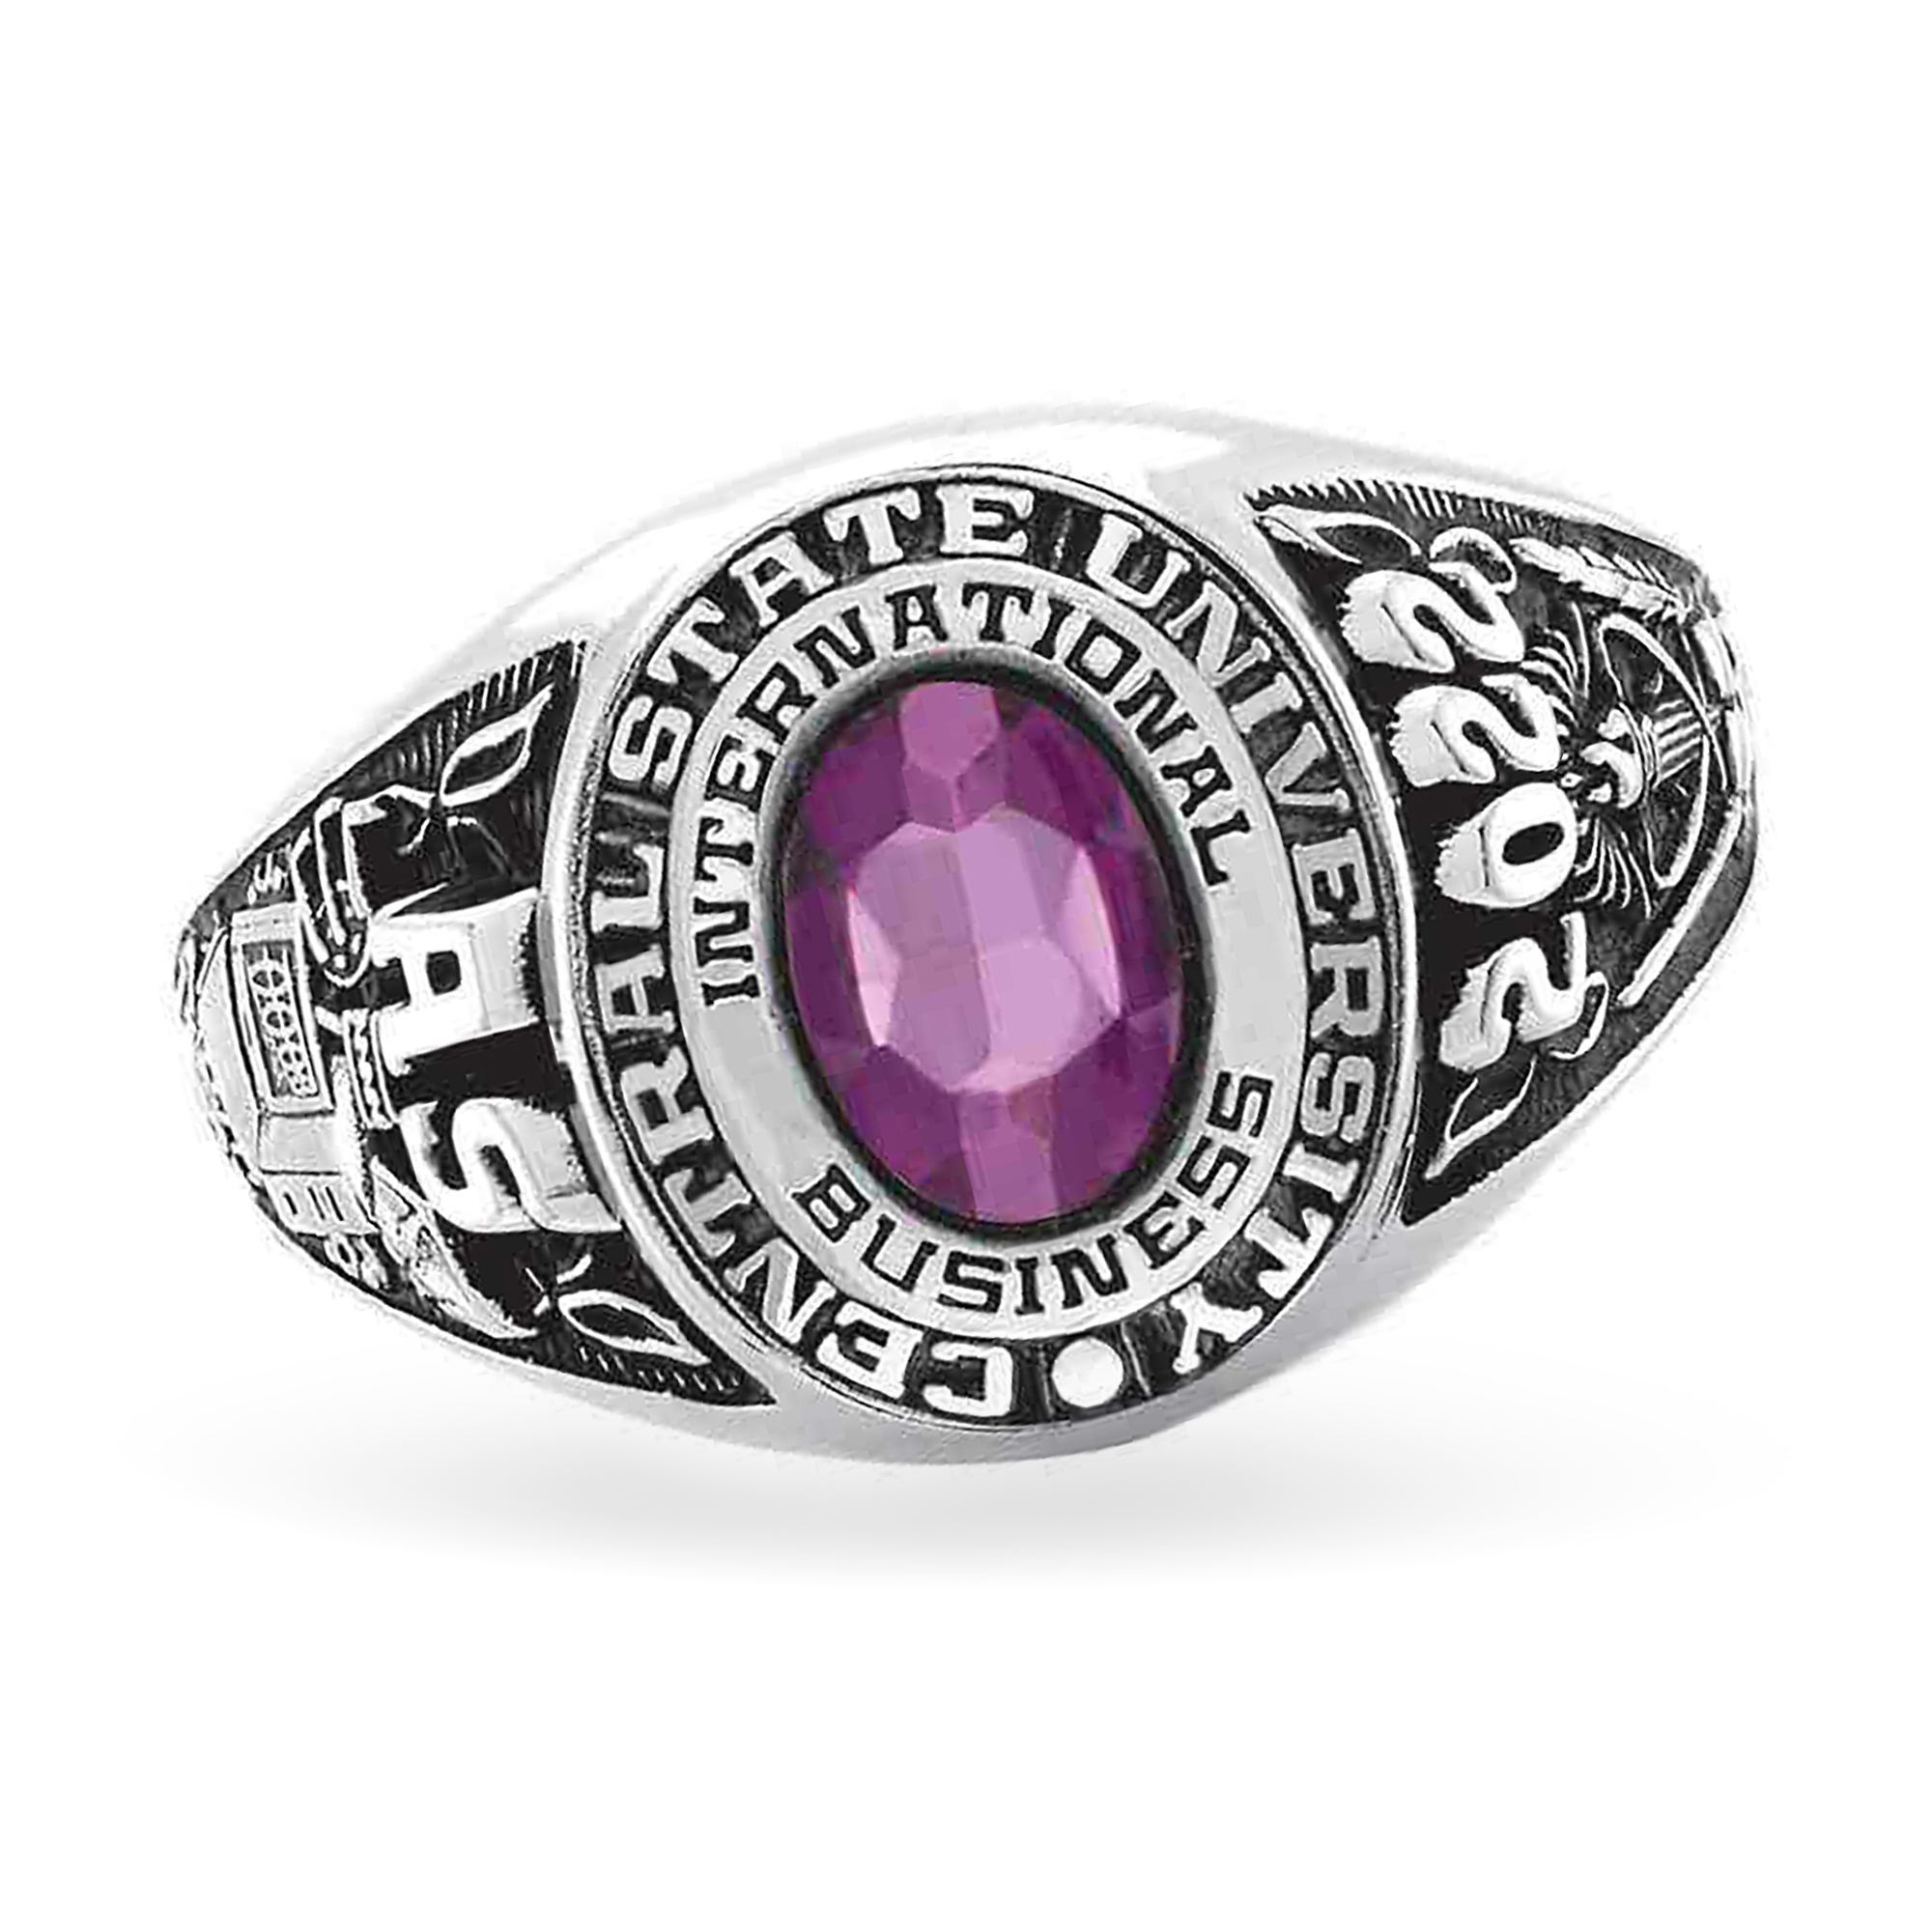 Image of Womens Tradition Collegiate Class Ring